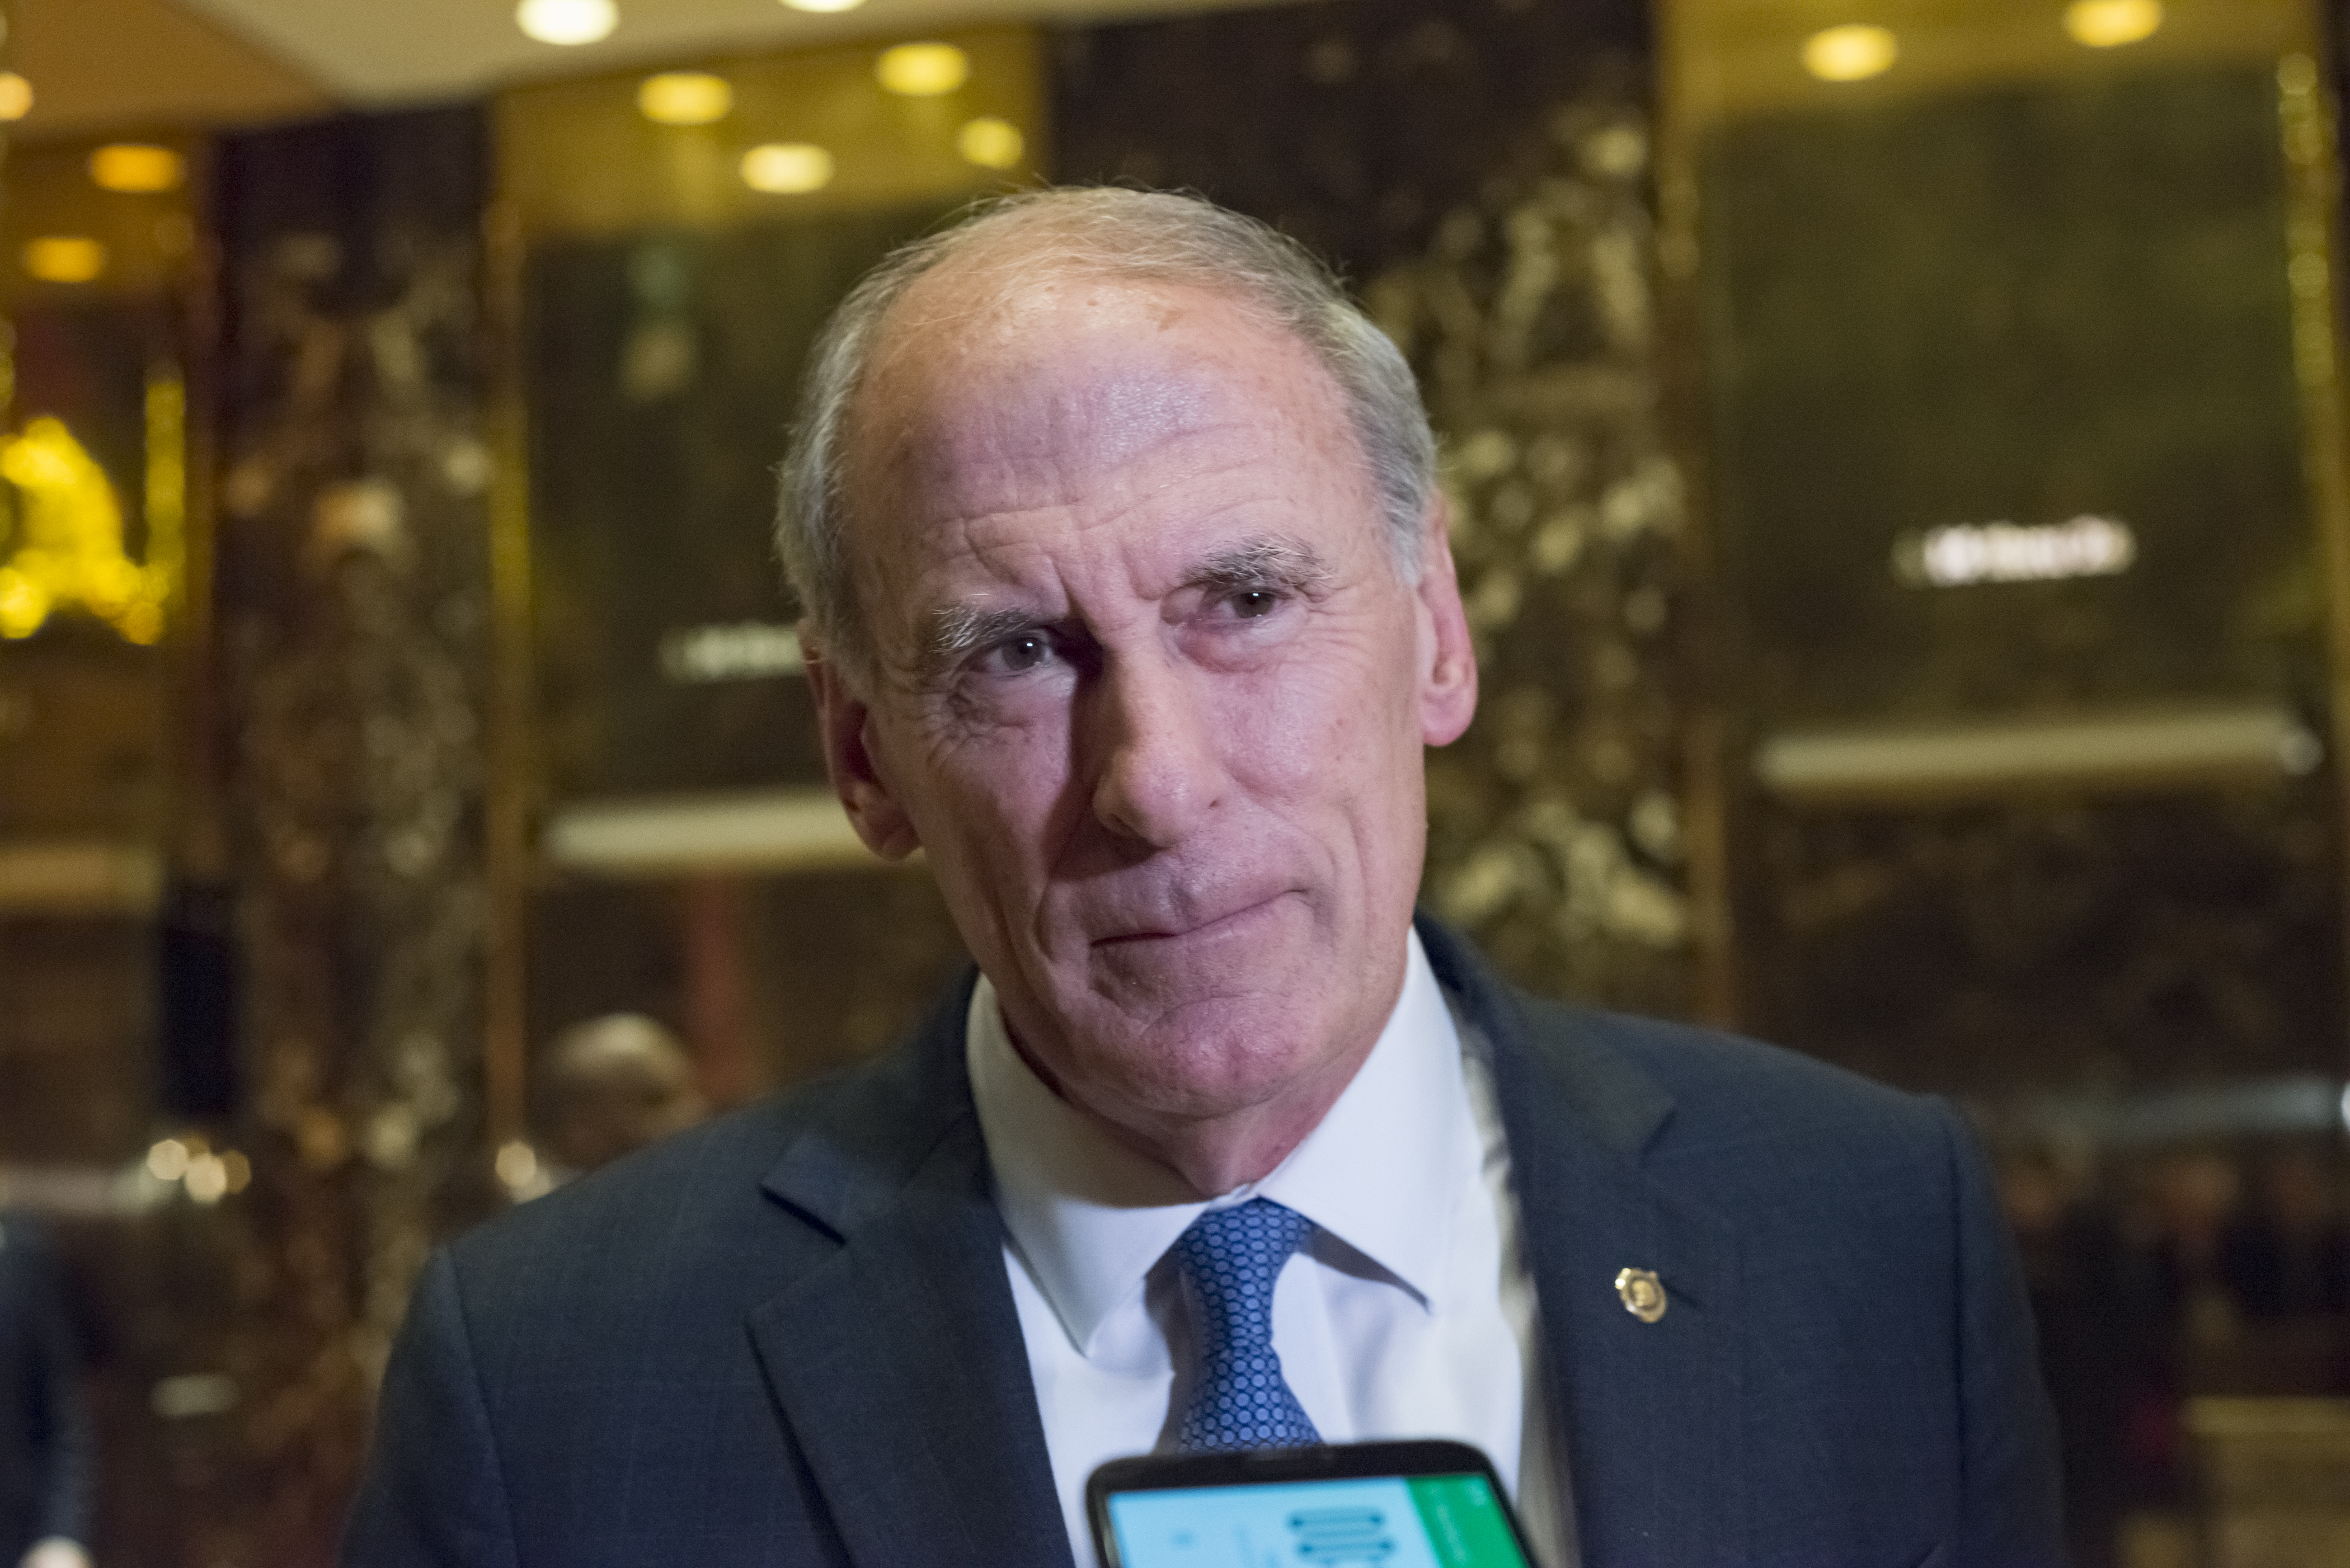 Senator Daniel Coats, a Republican from Indiana, pauses while speaking to the media in the lobby of Trump Tower in New York, U.S., on Wednesday, Nov. 30, 2016. (Albin Lohr-Jones&mdash;Bloomberg /Getty Images)